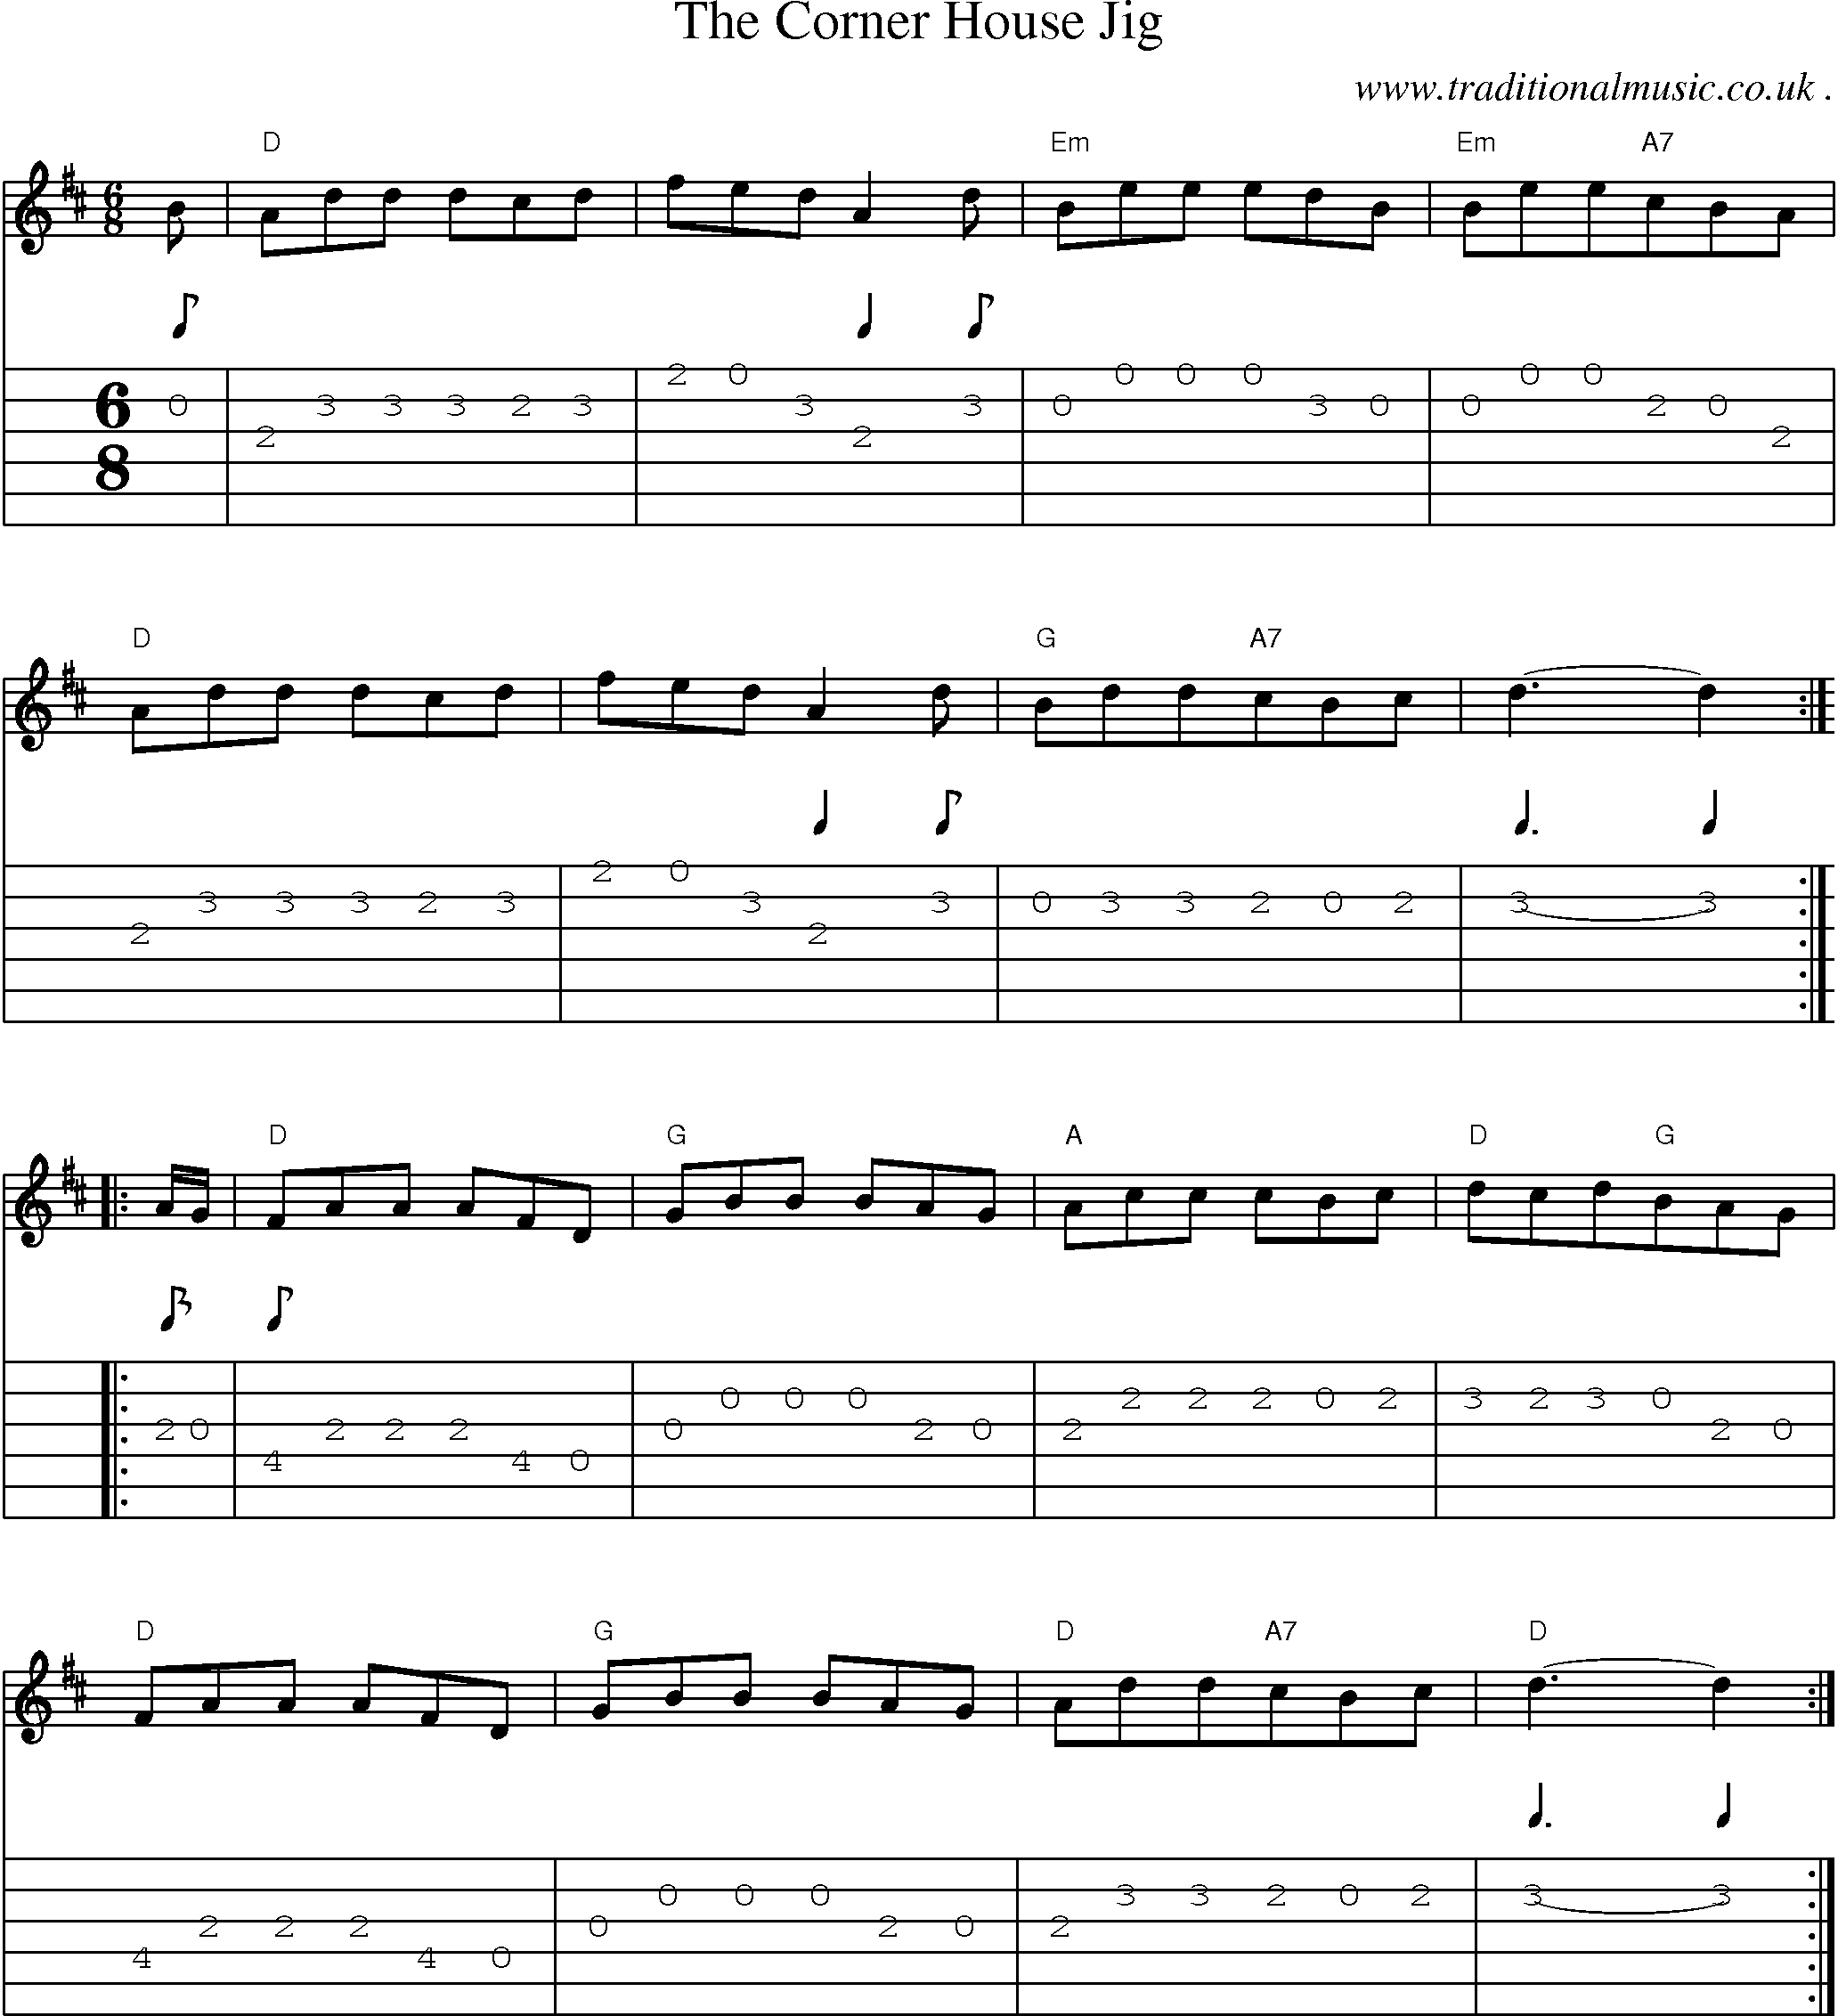 Sheet-Music and Guitar Tabs for The Corner House Jig